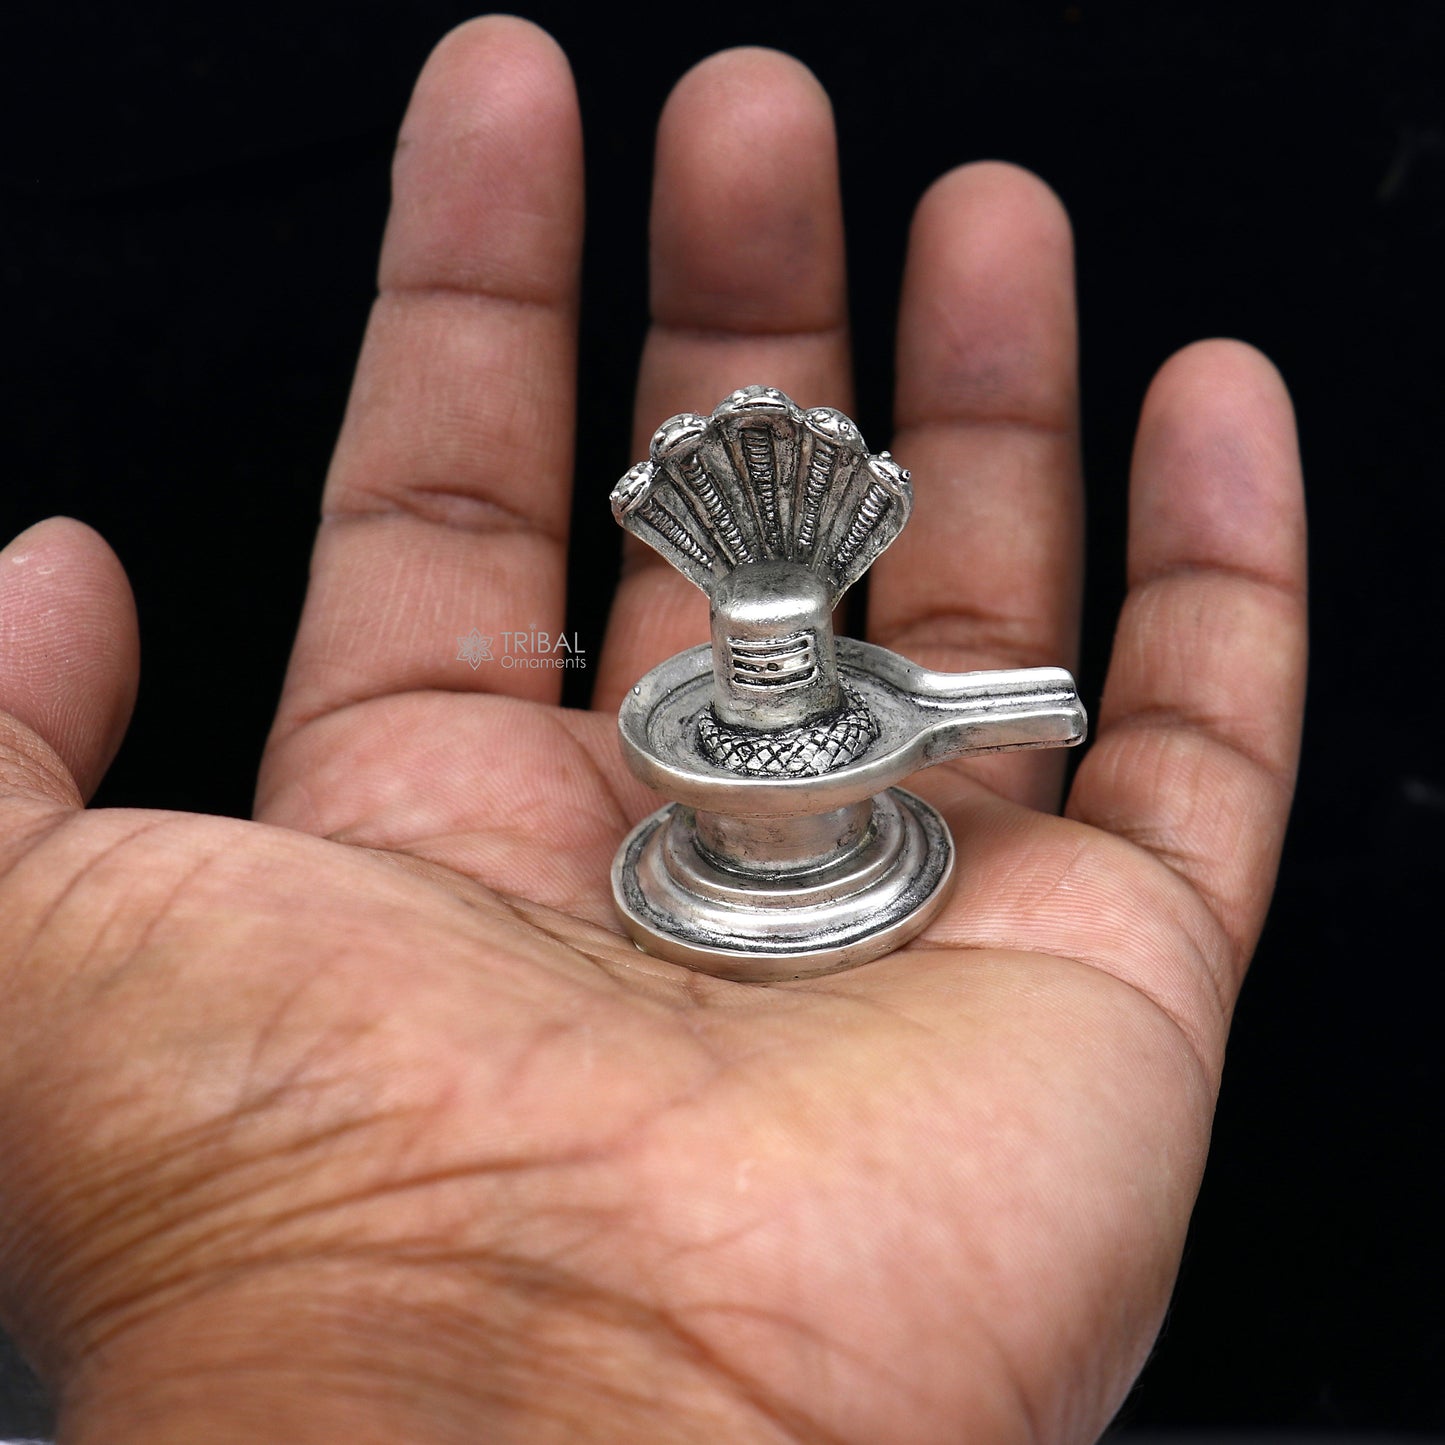 925 sterling silver lord Shiva lingam Jalheri/ jaladhari Divine Shiva lingam at home temple puja worshipping article from India art655 - TRIBAL ORNAMENTS